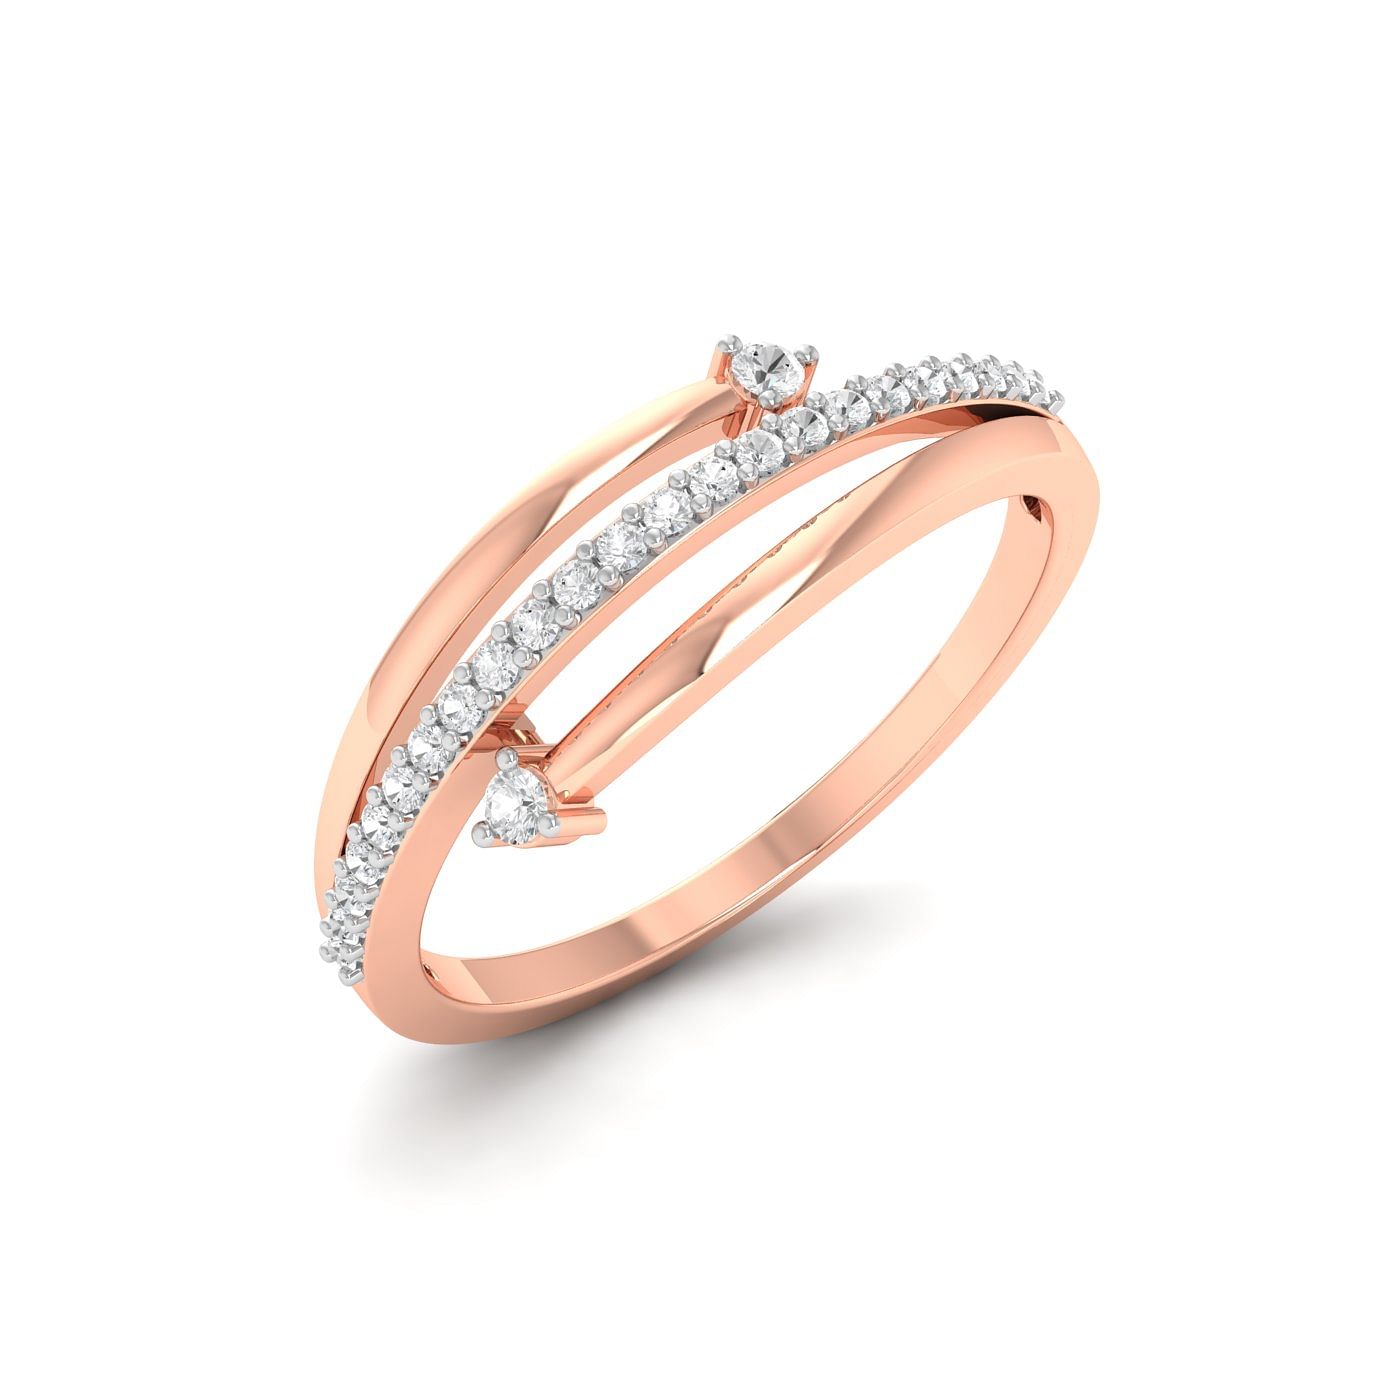 Half Eternity Spring Diamond Ring With Rose Gold For Gift For Her